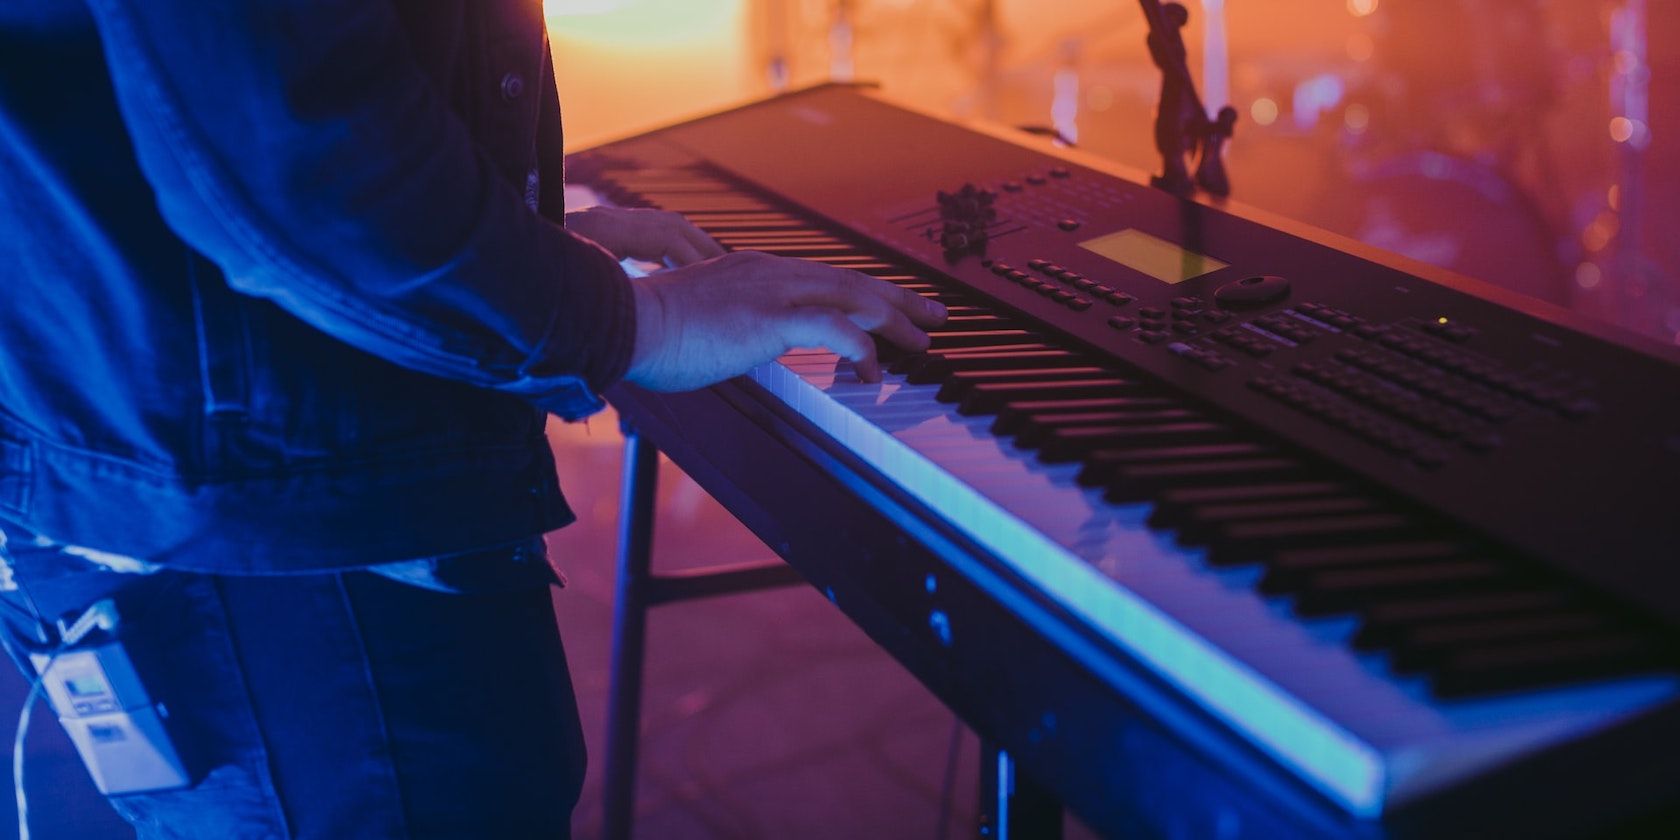 A person playing a MIDI keyboard at a live music performance.